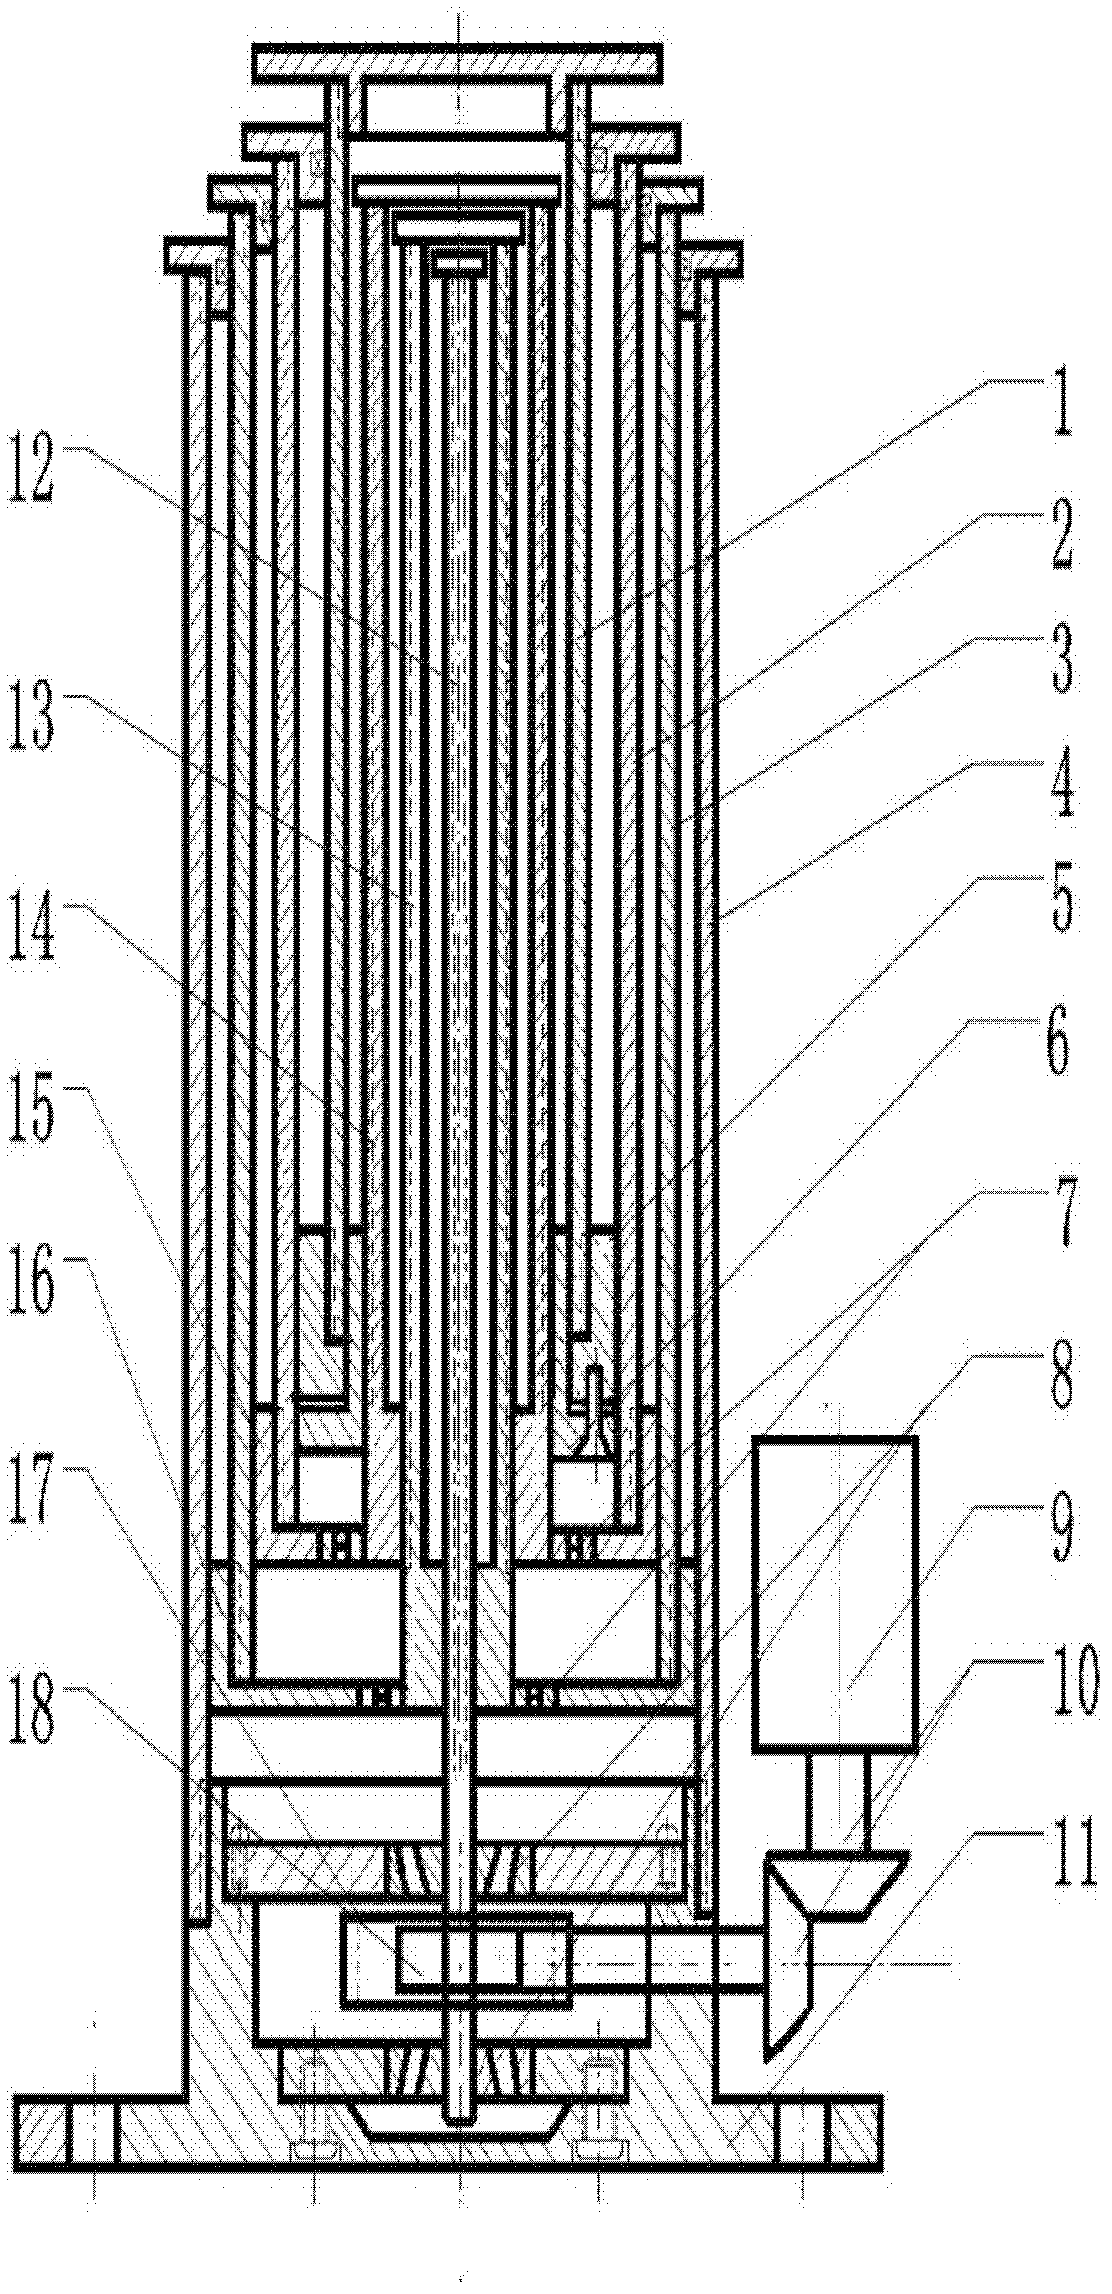 Heavy-load high-accuracy lifting device with multiple sections capable of freely extending and retracting